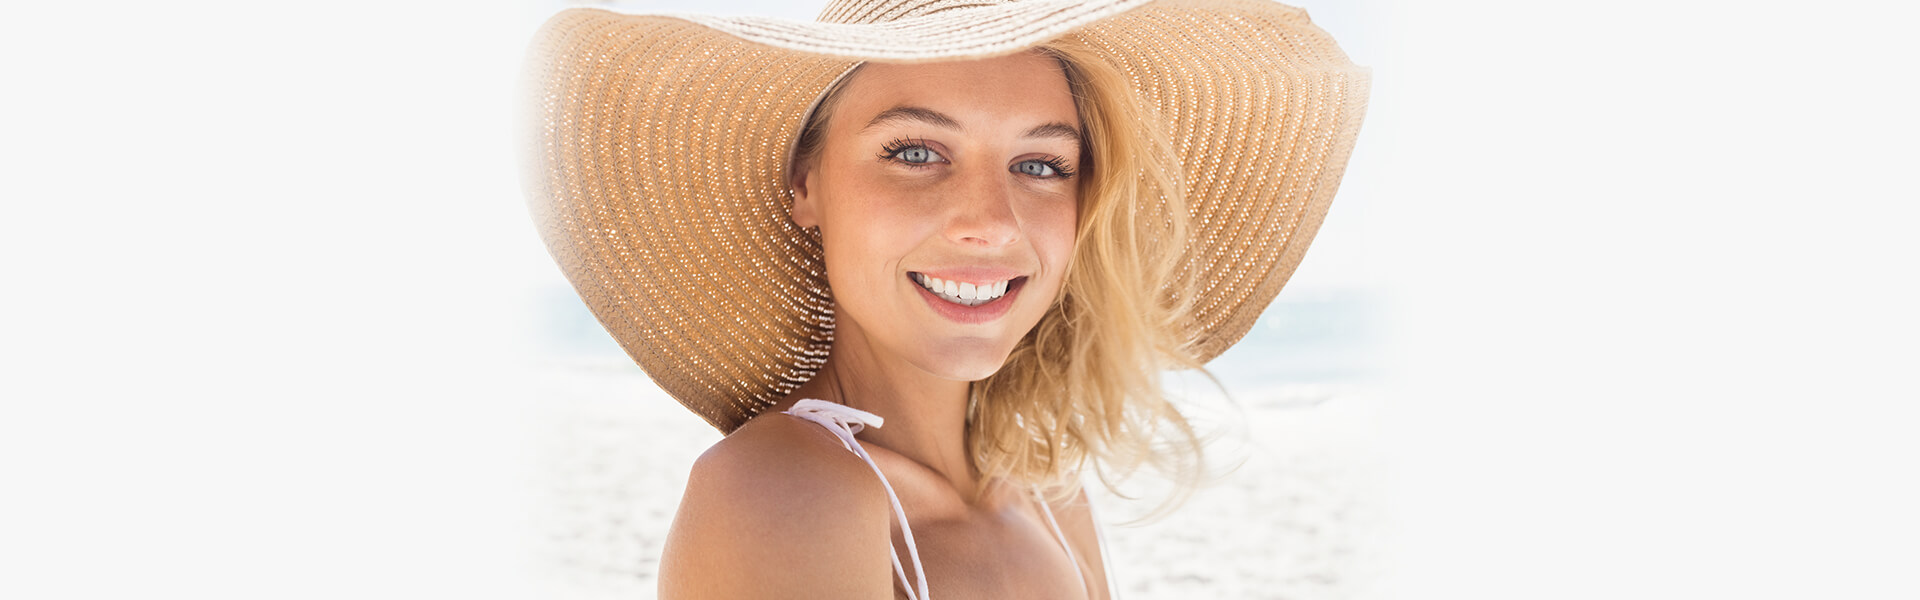 Teeth Whitening, Is it Worth It? Learn the Benefits and Risks